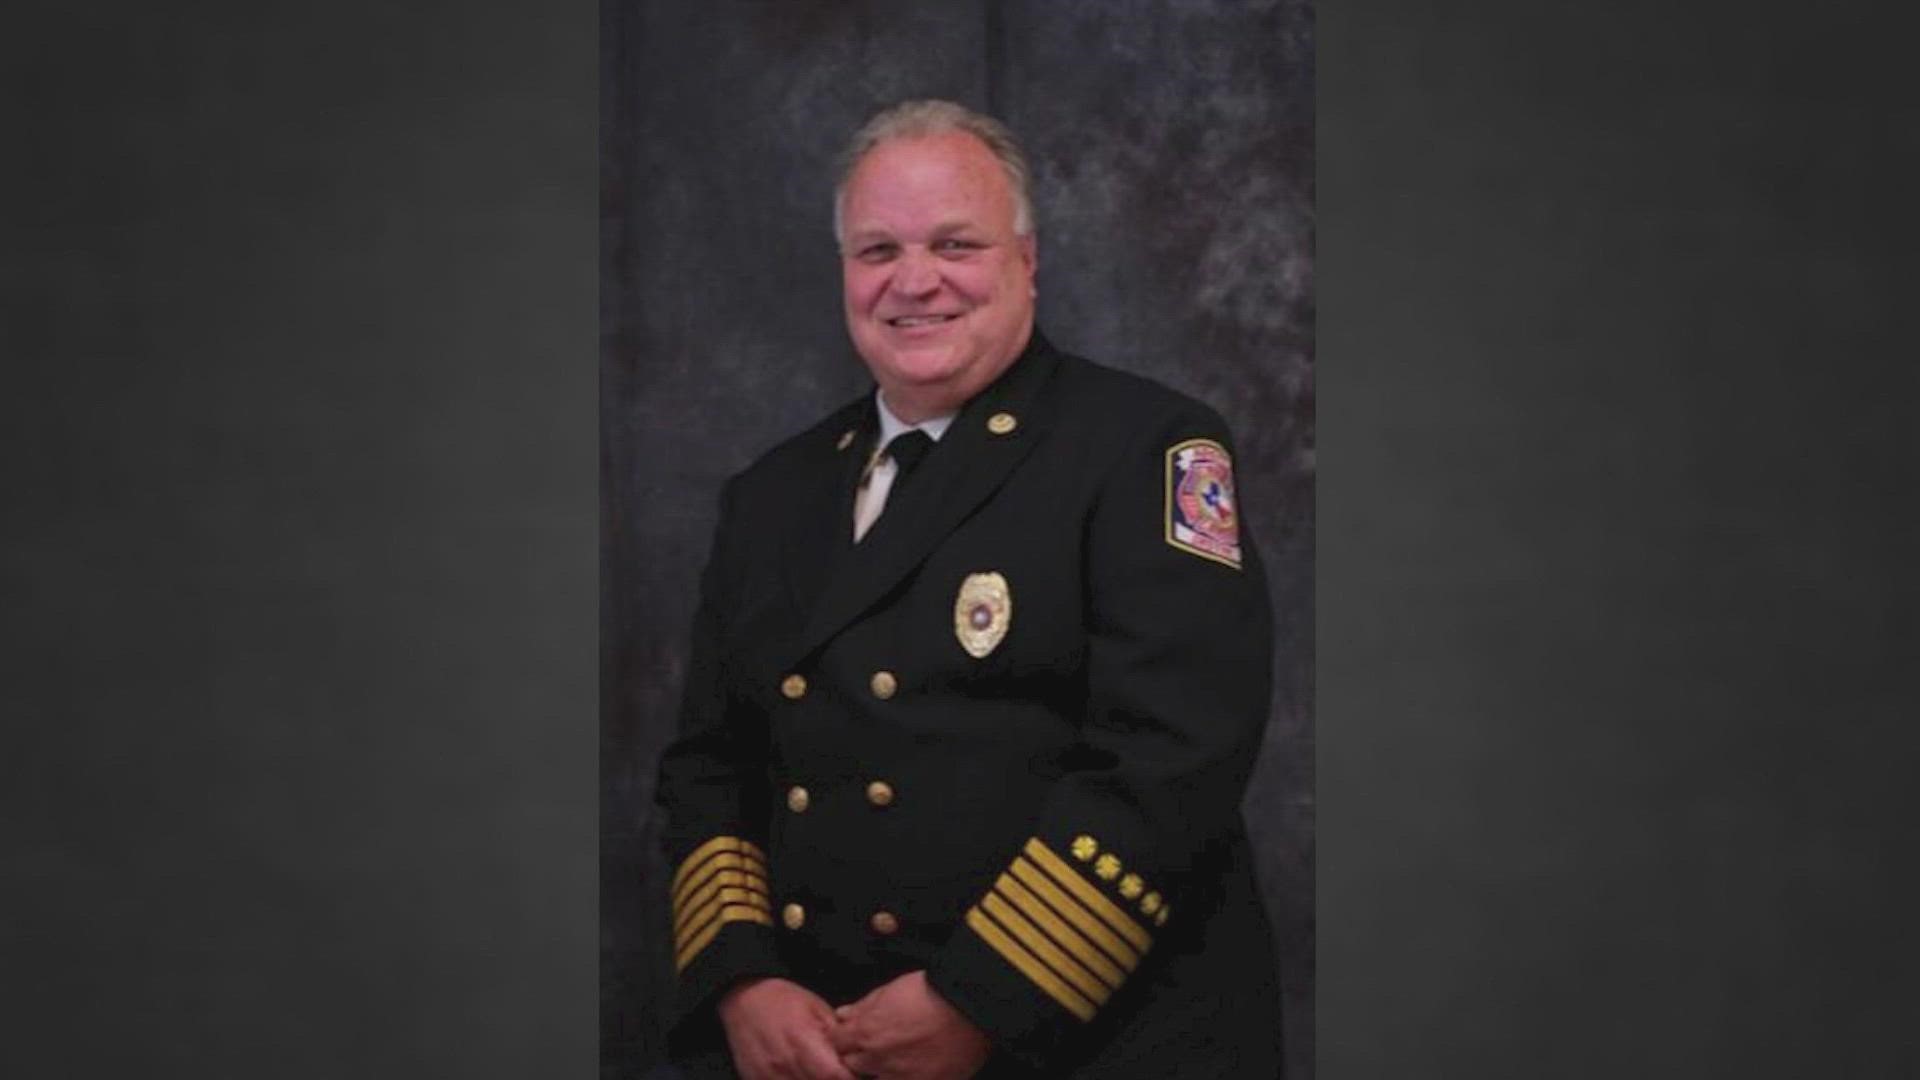 Denton County ESD No. 1 Fire Chief Mac Hohenberger is accused of stealing from his fire department's pension fund.